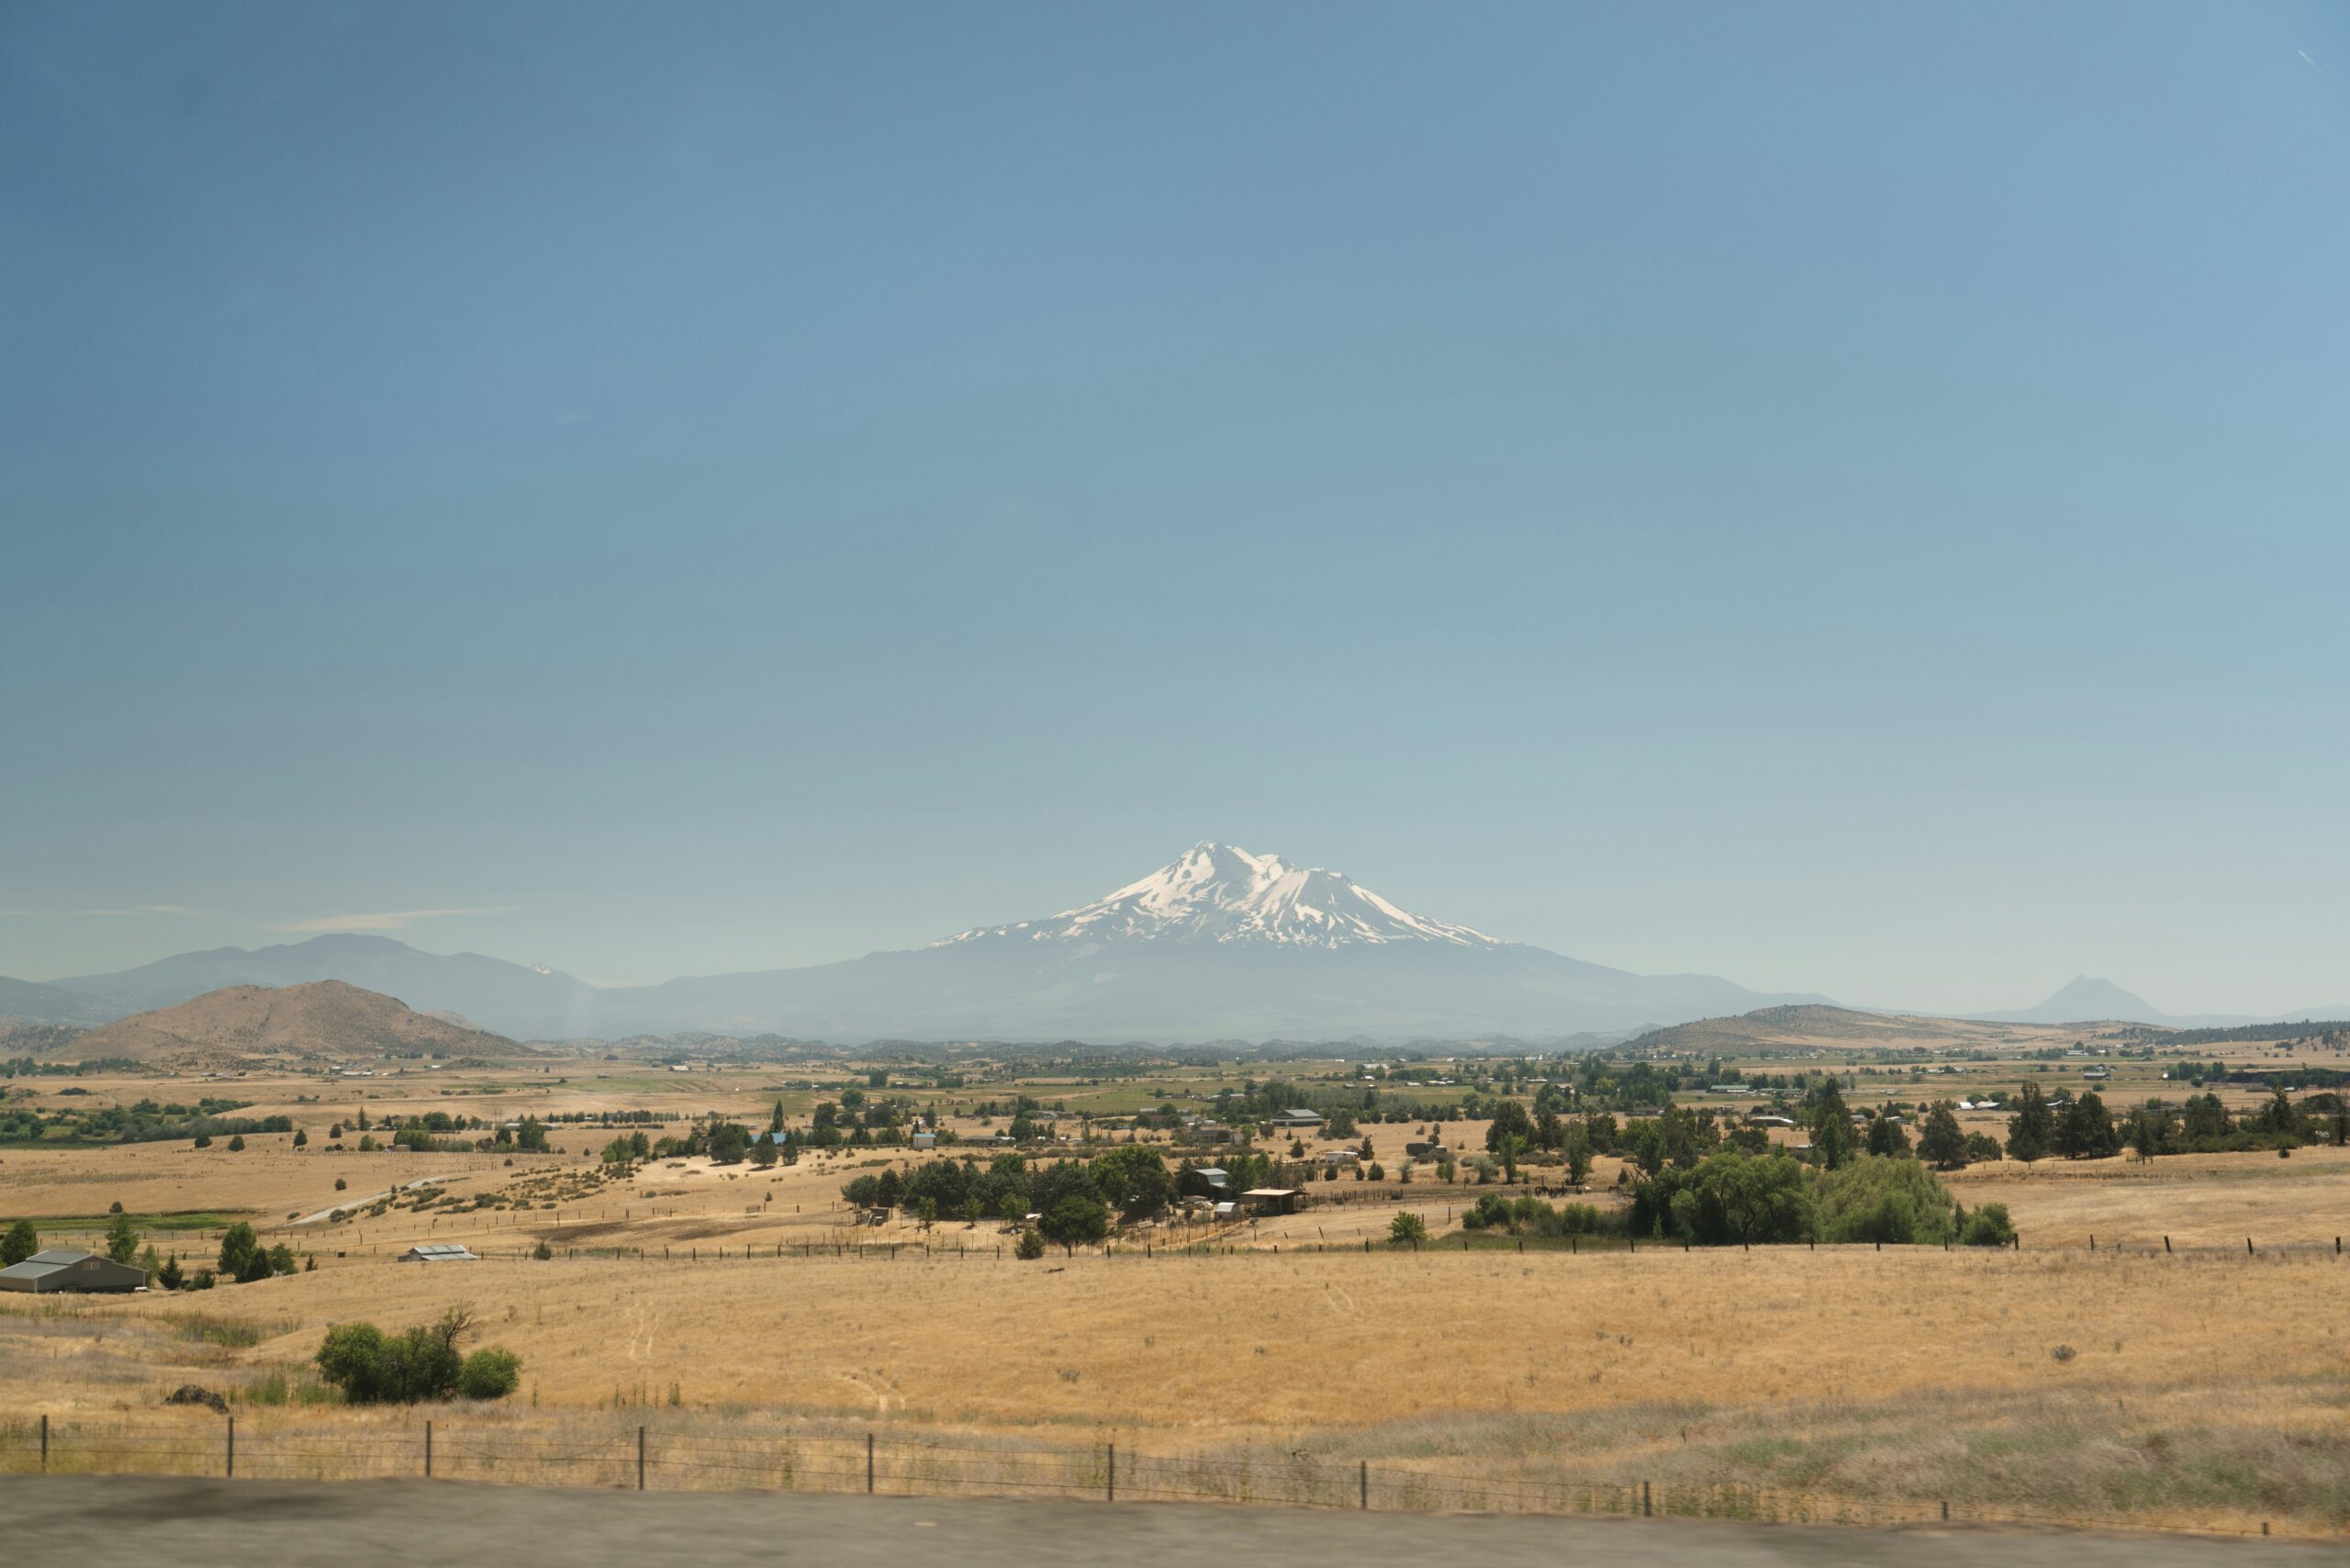 Do The Campgrounds Near Mount Shasta Have Bathrooms?